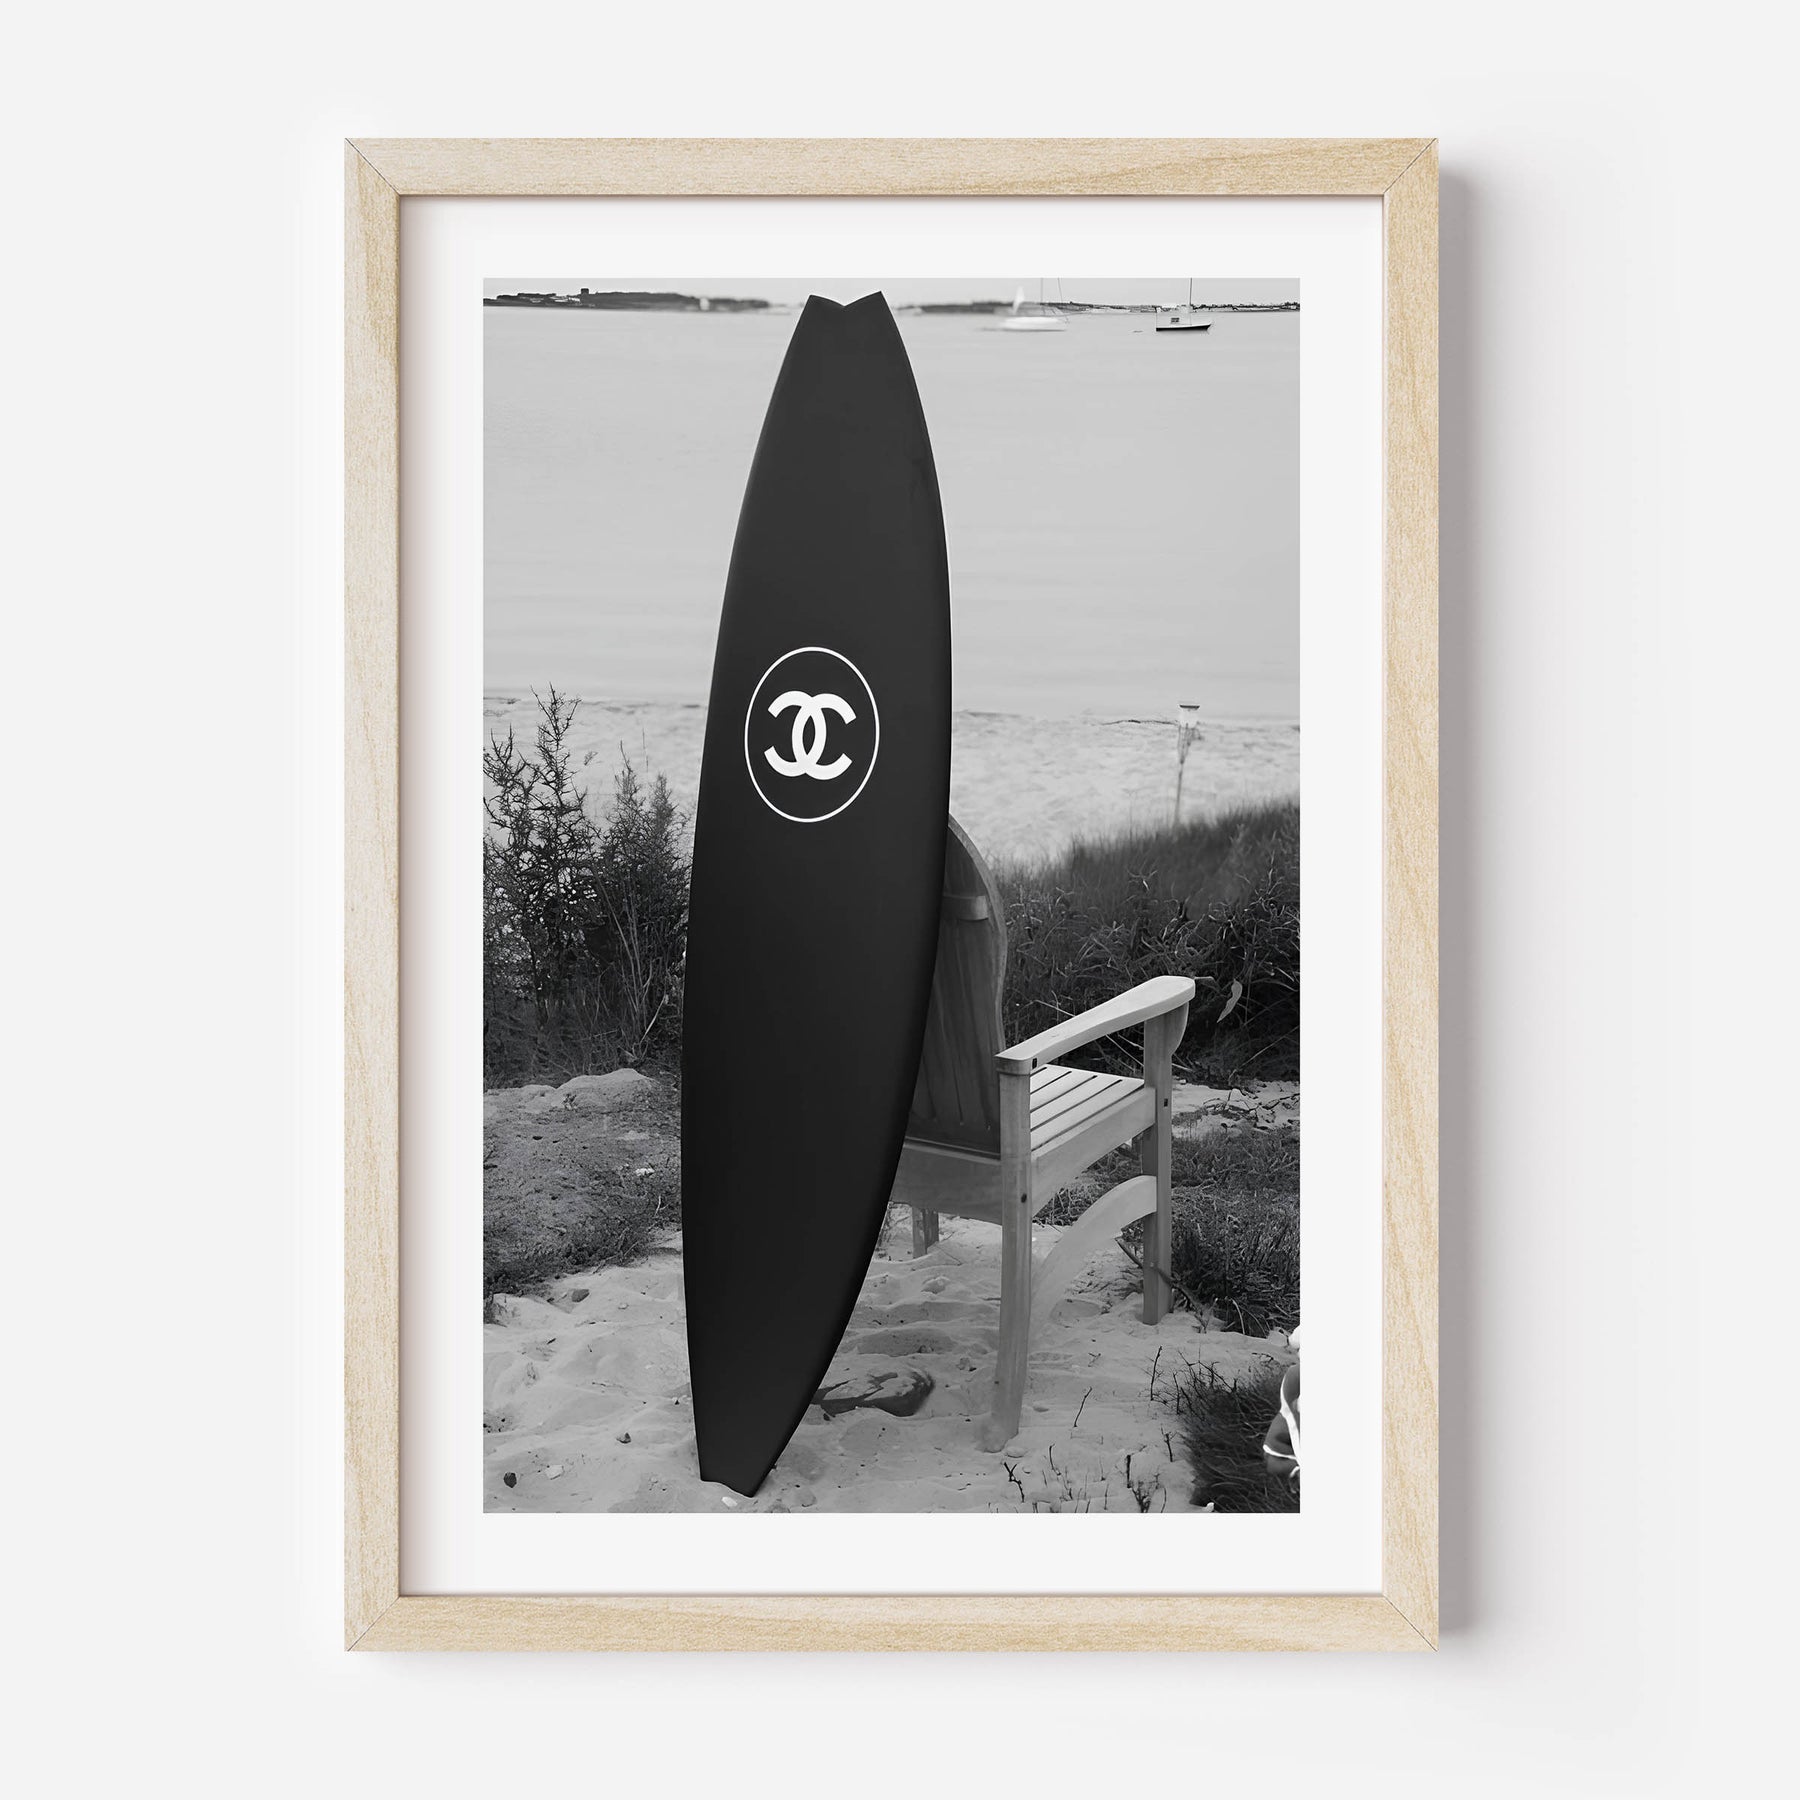 Chanel Surfboard Poster, Feminist Print,Large Square, XL Art